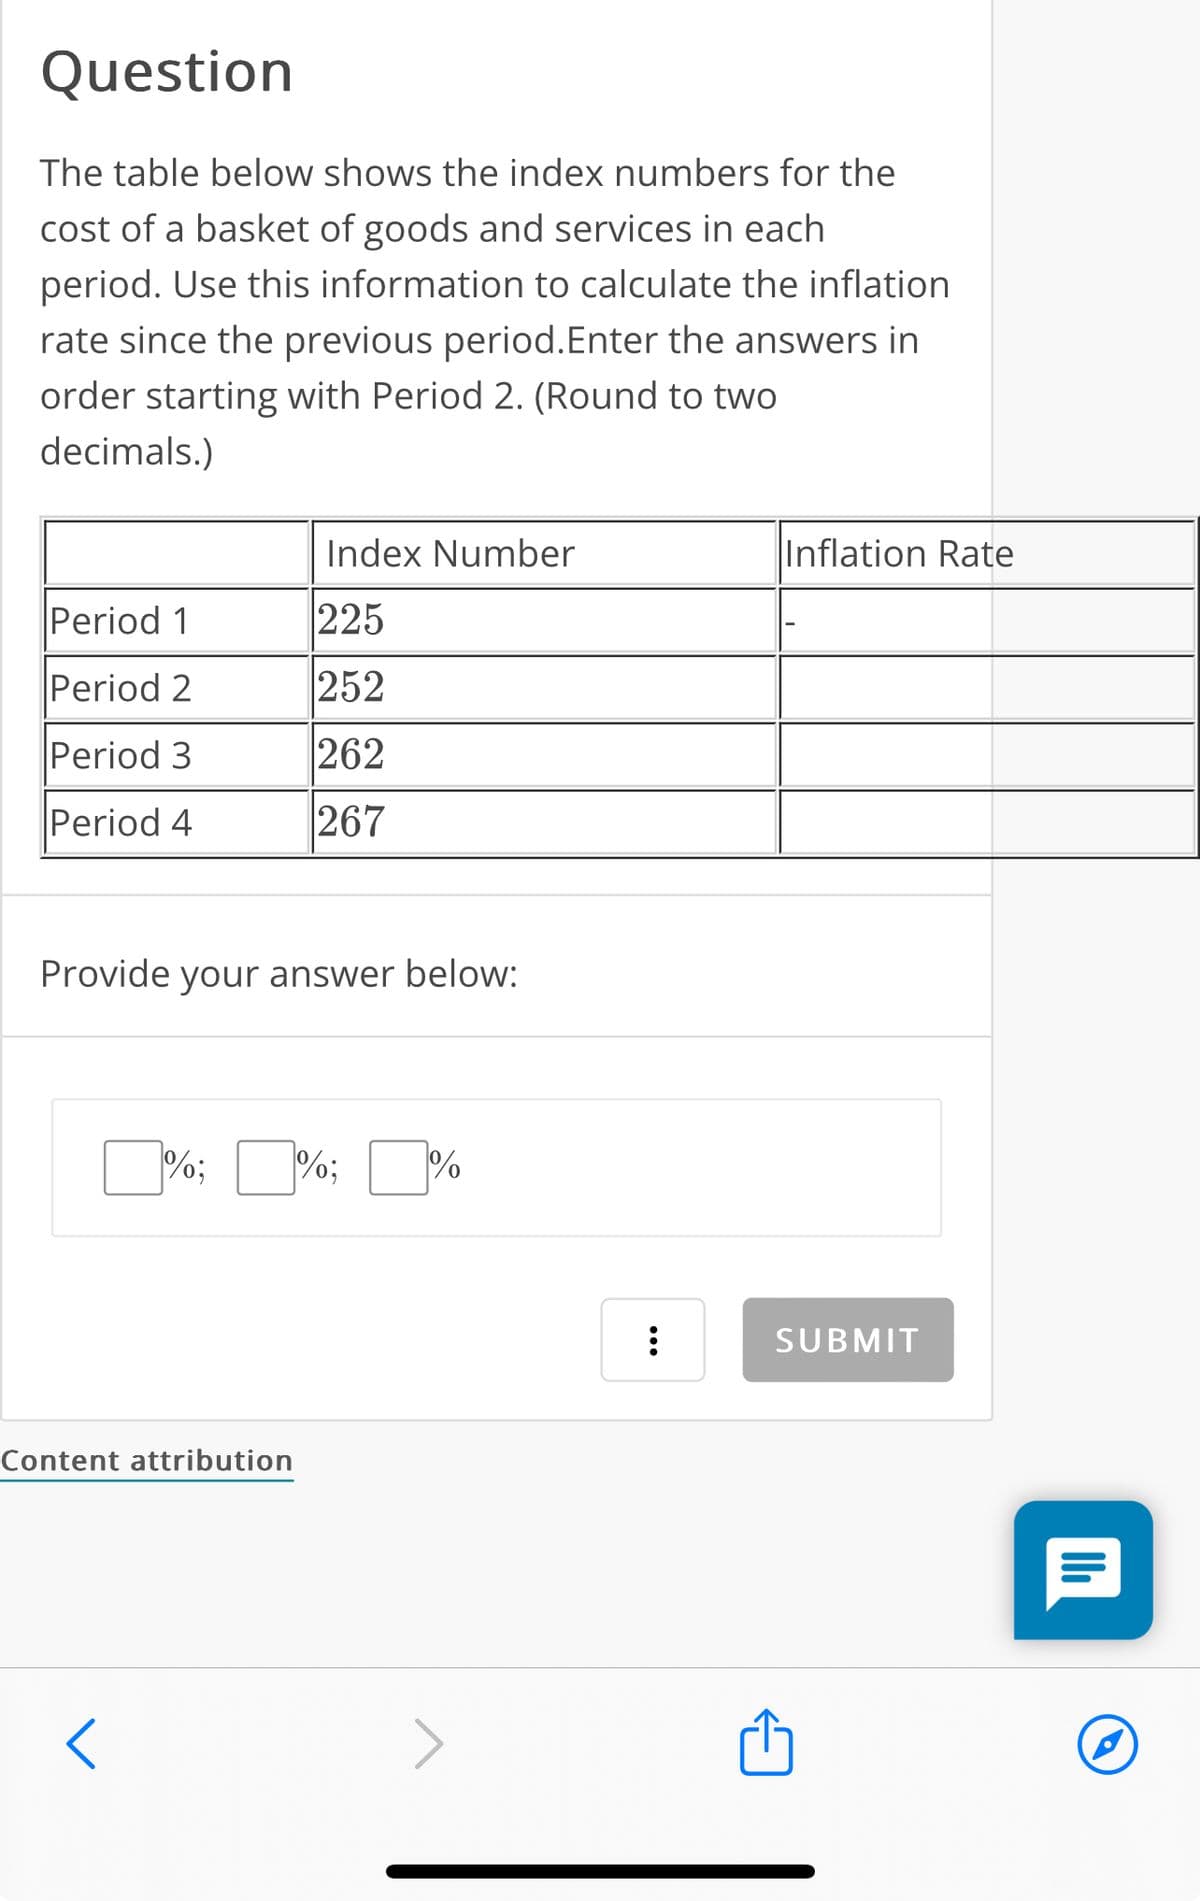 Question
The table below shows the index numbers for the
cost of a basket of goods and services in each
period. Use this information to calculate the inflation
rate since the previous period. Enter the answers in
order starting with Period 2. (Round to two
decimals.)
Index Number
Period 1
225
Period 2
252
Period 3
262
Period 4
267
Provide your answer below:
%;
%;
%
Content attribution
<
Inflation Rate
SUBMIT
ווי